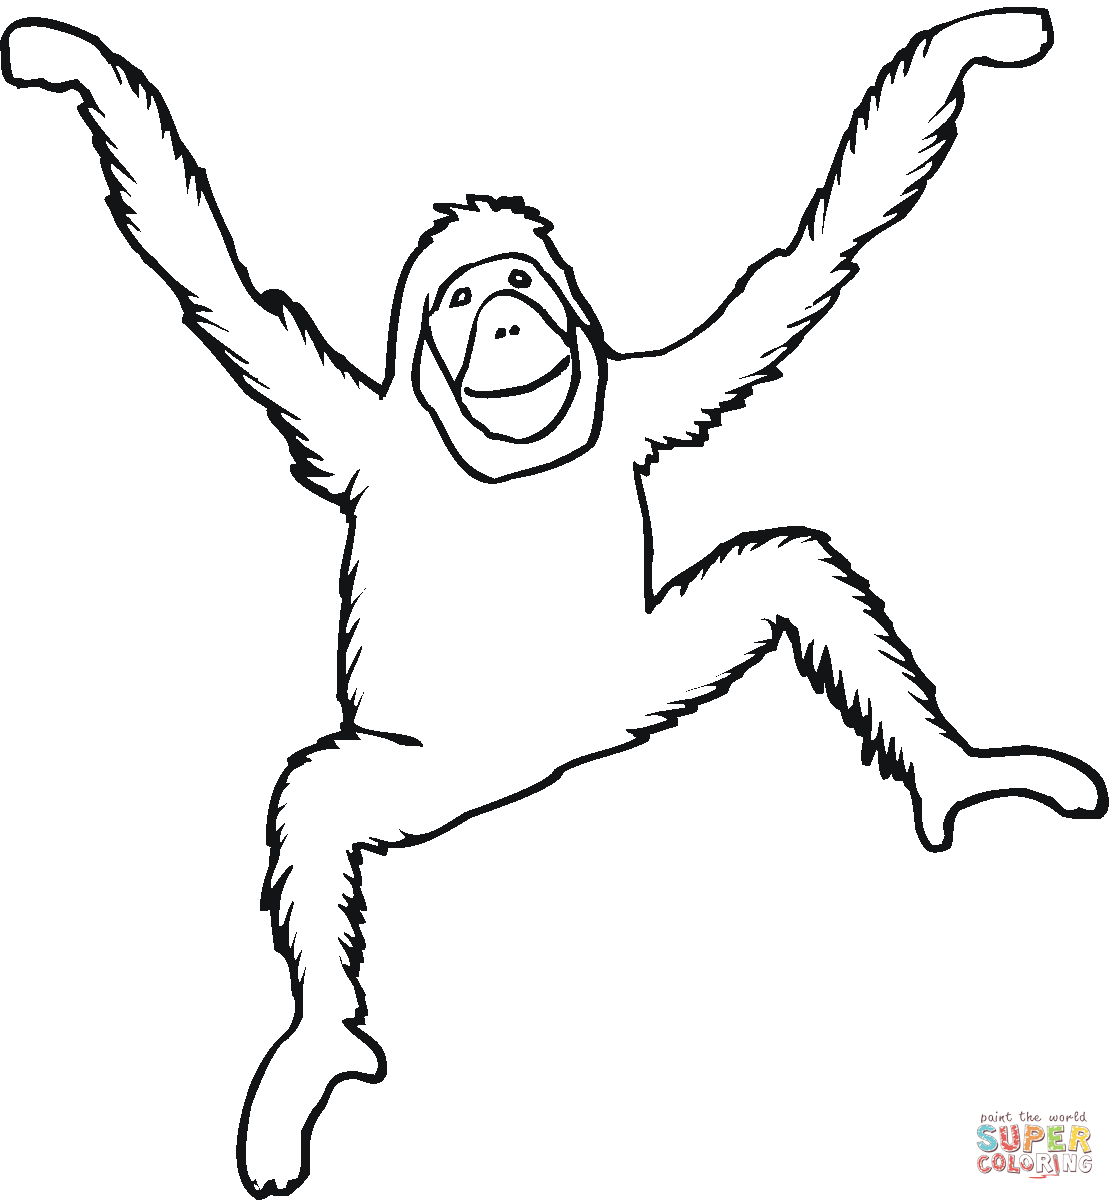 Orangutan coloring page free printable coloring pages orangutan endangered animals activities coloring pages